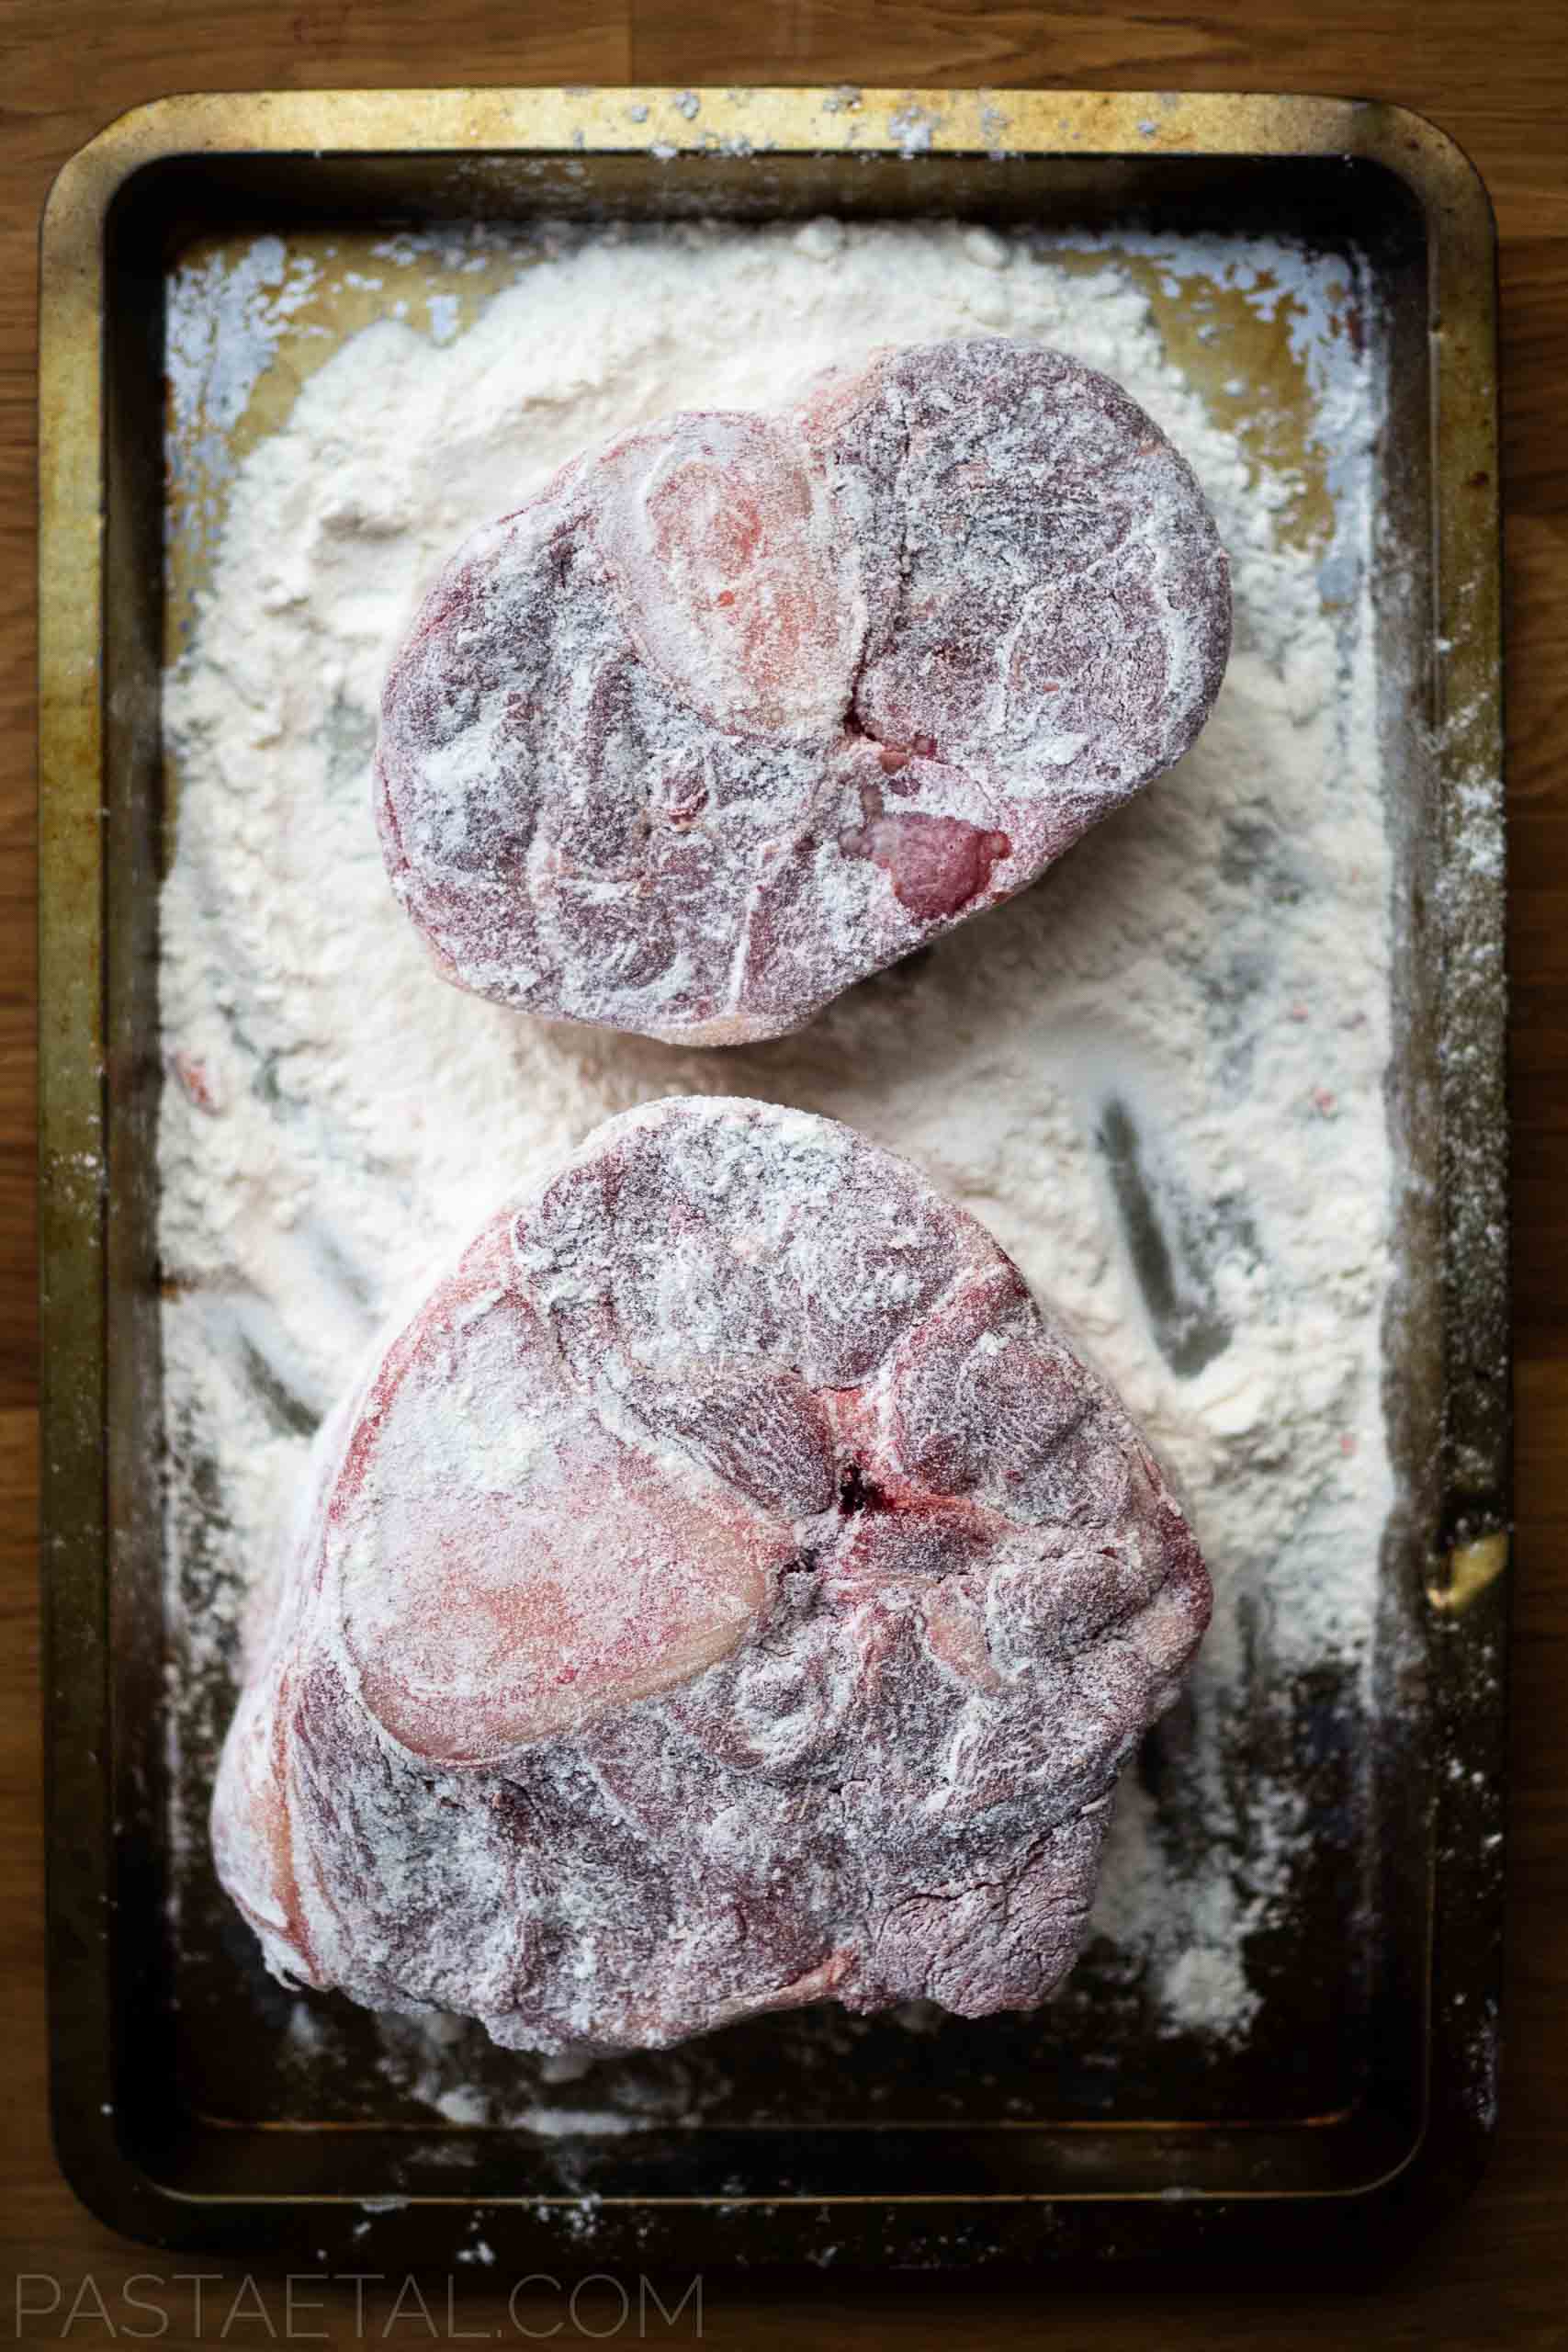 https://pastaetal.com/wp-content/uploads/2020/07/osso-bucco-dredged-with-flour-in-a-baking-tray.jpg